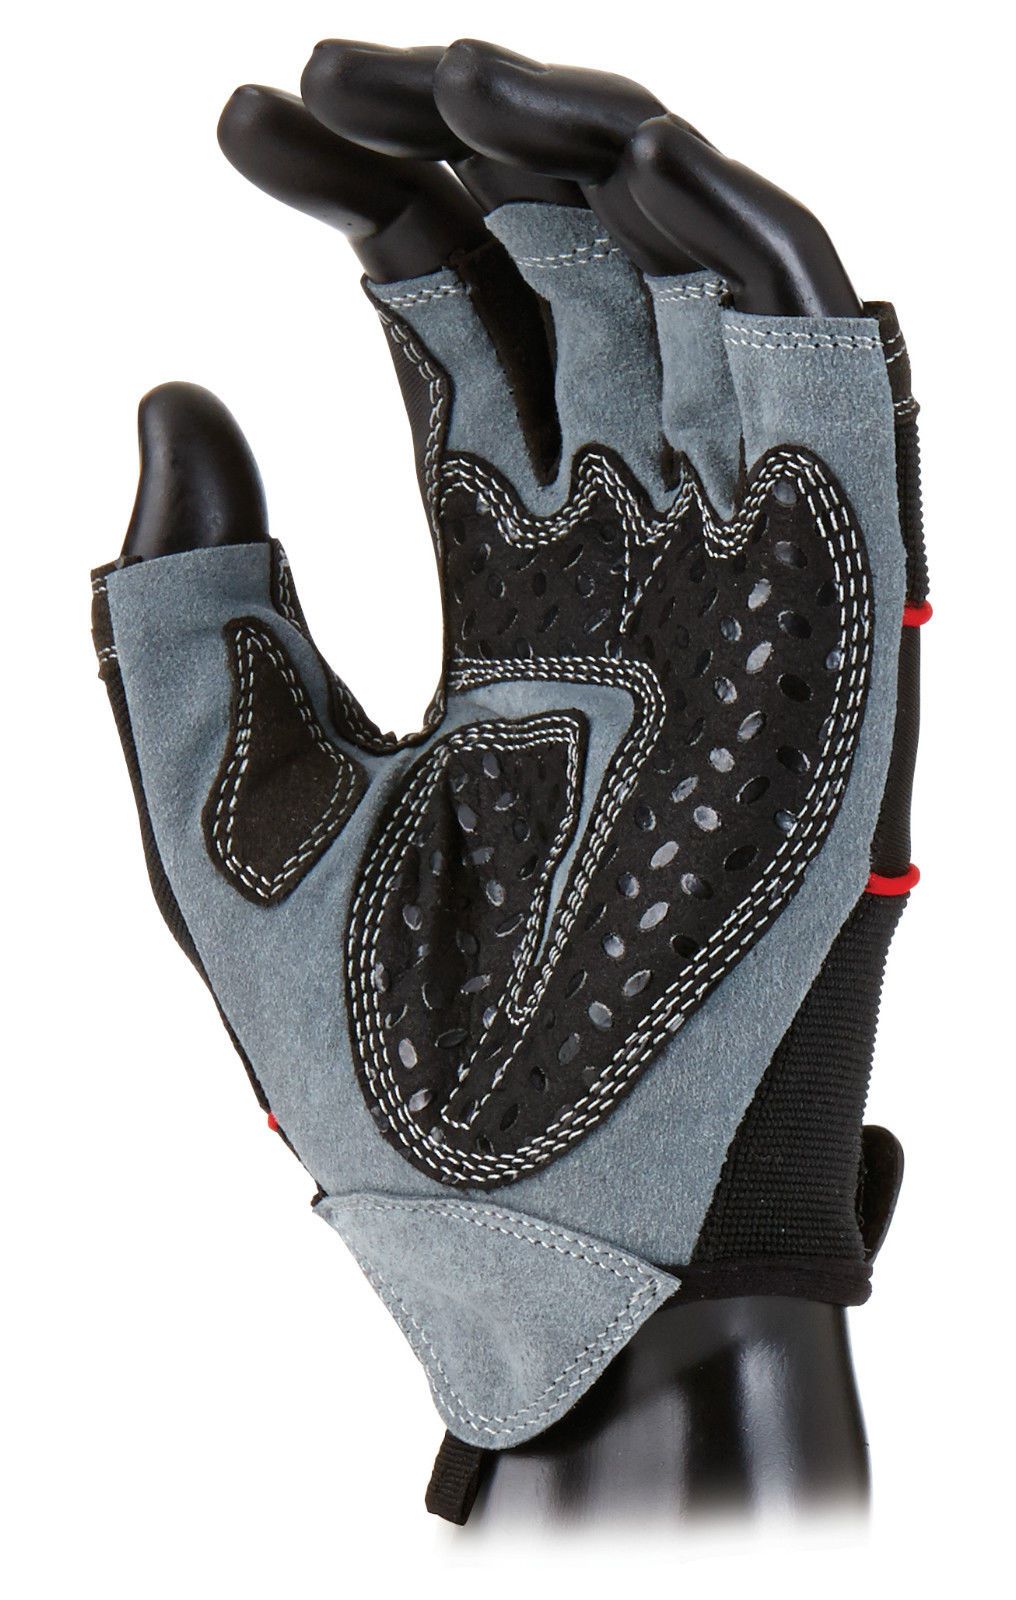 Maxisafe G-Force 'Grip' Mechanics Synthetic Fingerless Safety Gloves